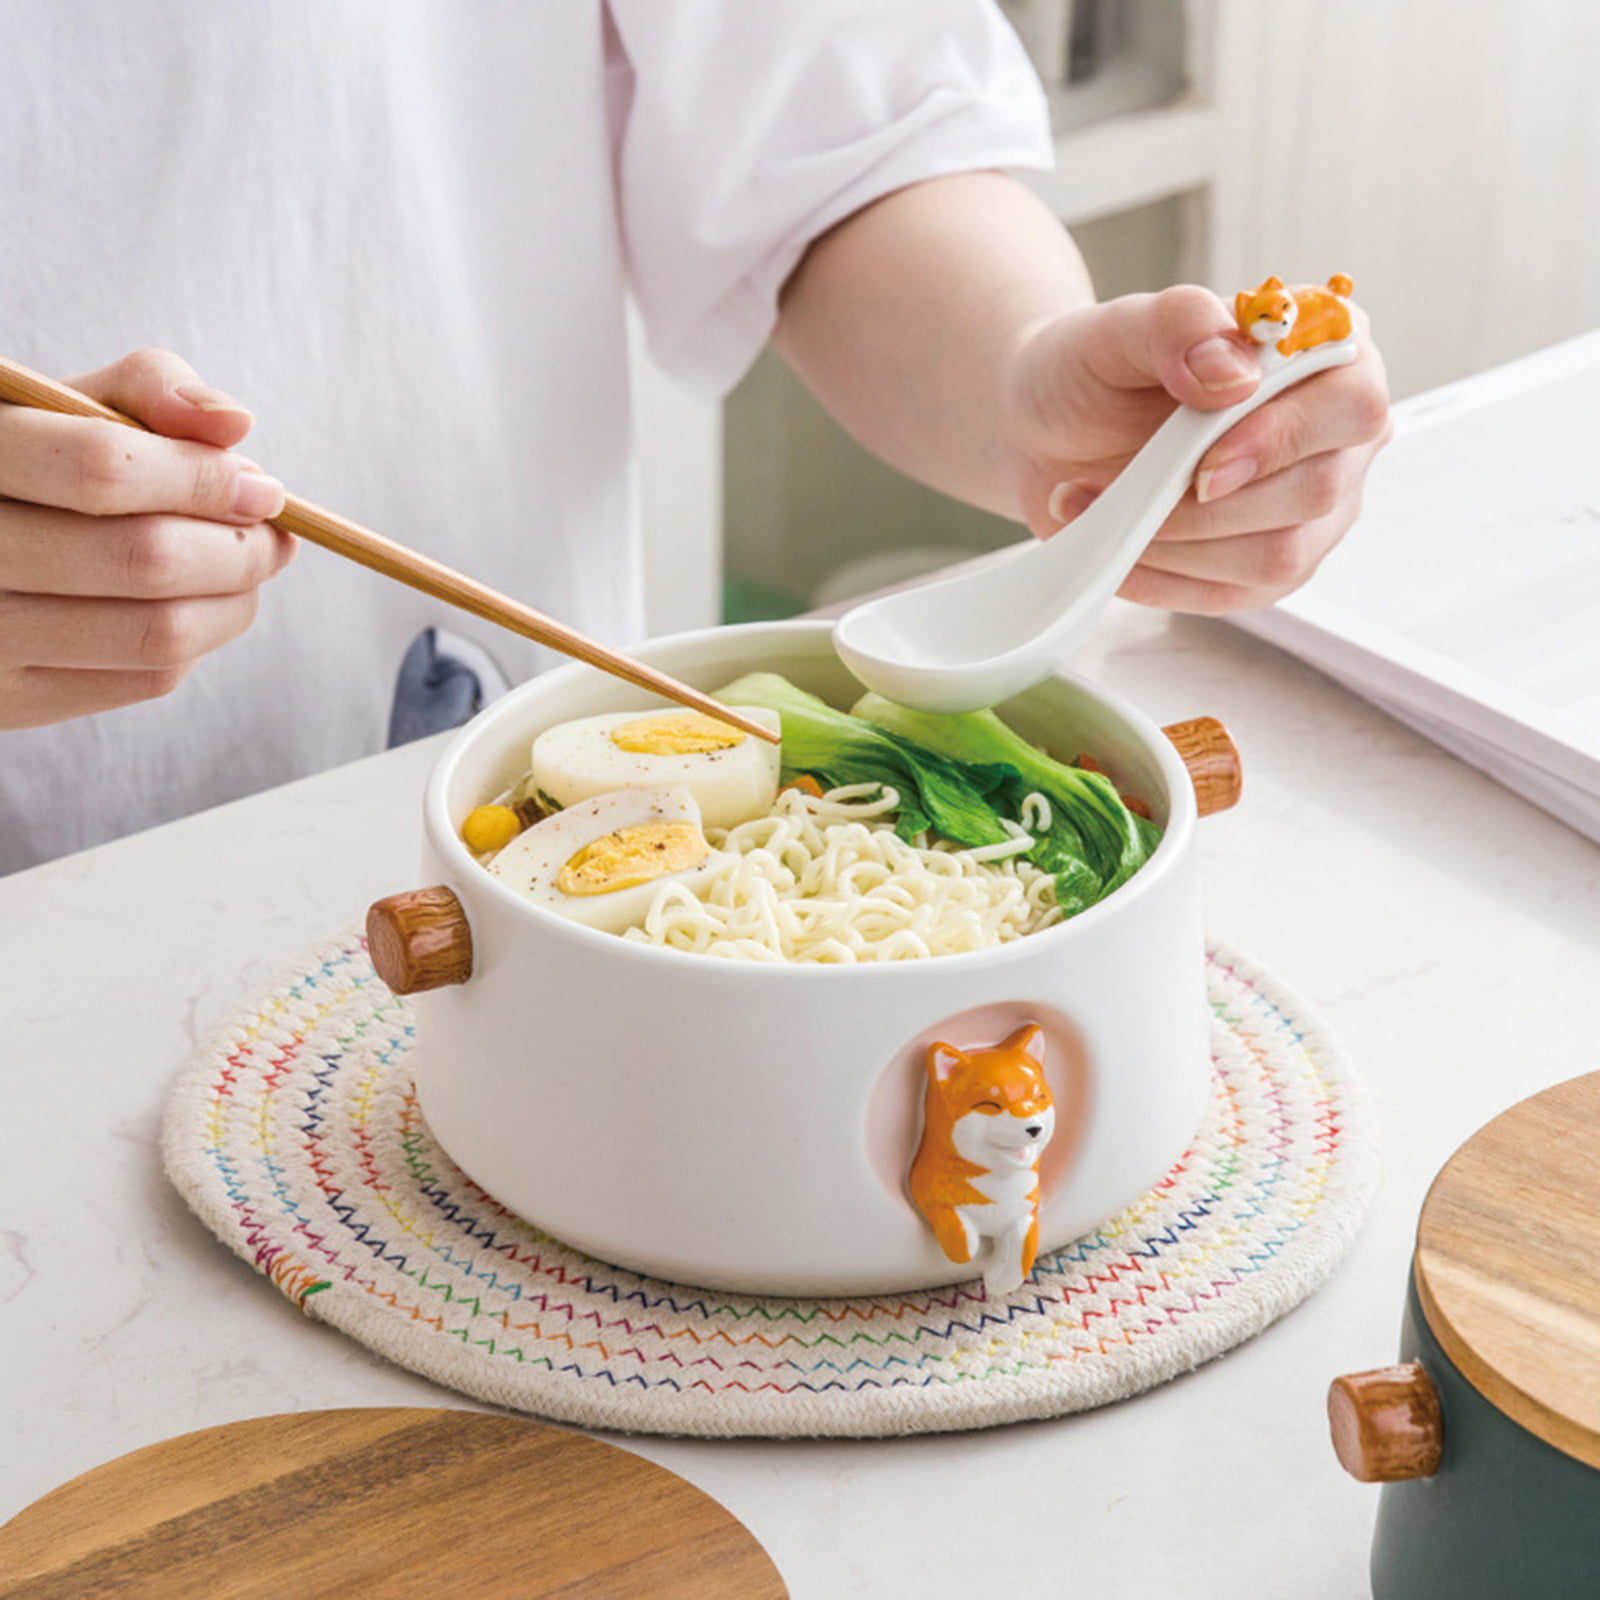 32oz Instant Noodle Bowl with Handles, Ceramic Soup Bowl with Lid, Porcelain Breakfast Bowl, Microwave Bowl, for Dormitory Home Office-White-900ml